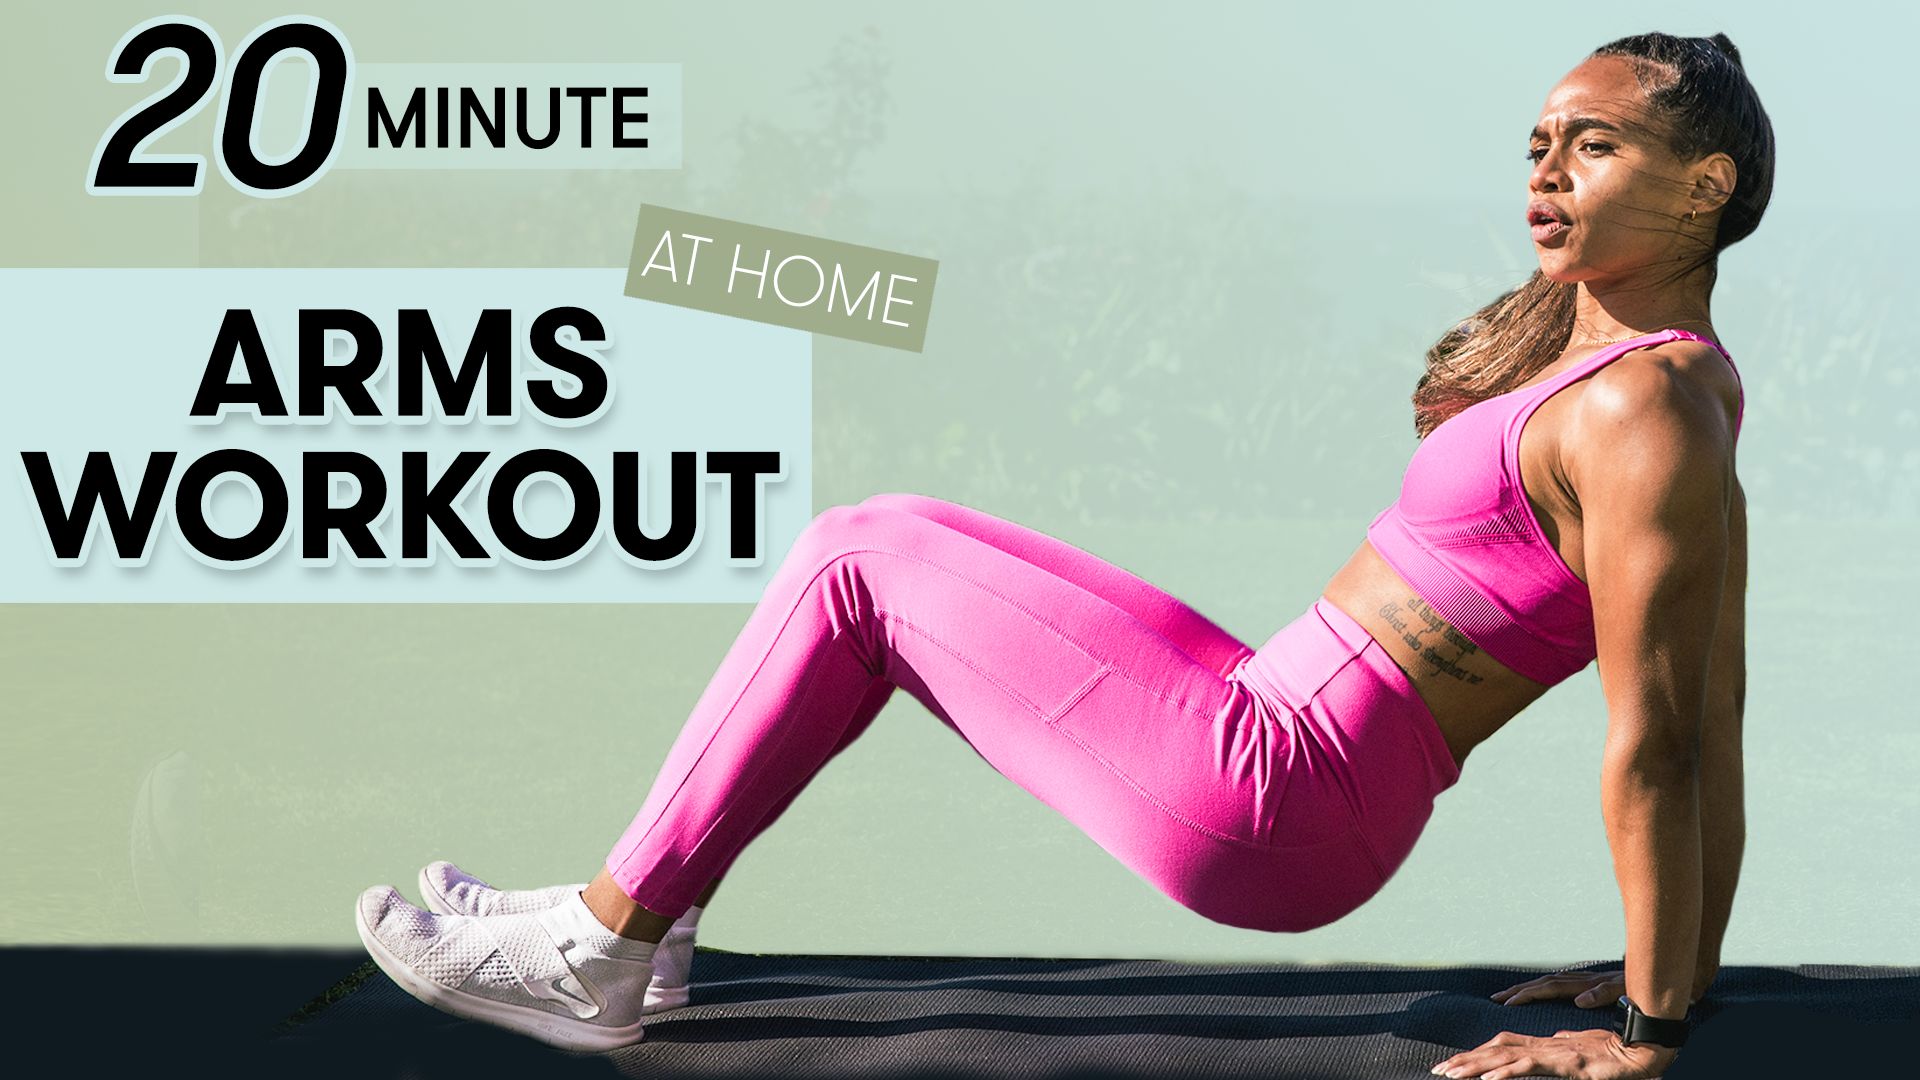 15+ Super Effective Workouts To Tone Your Arms At Home (free videos) - A  Less Toxic Life